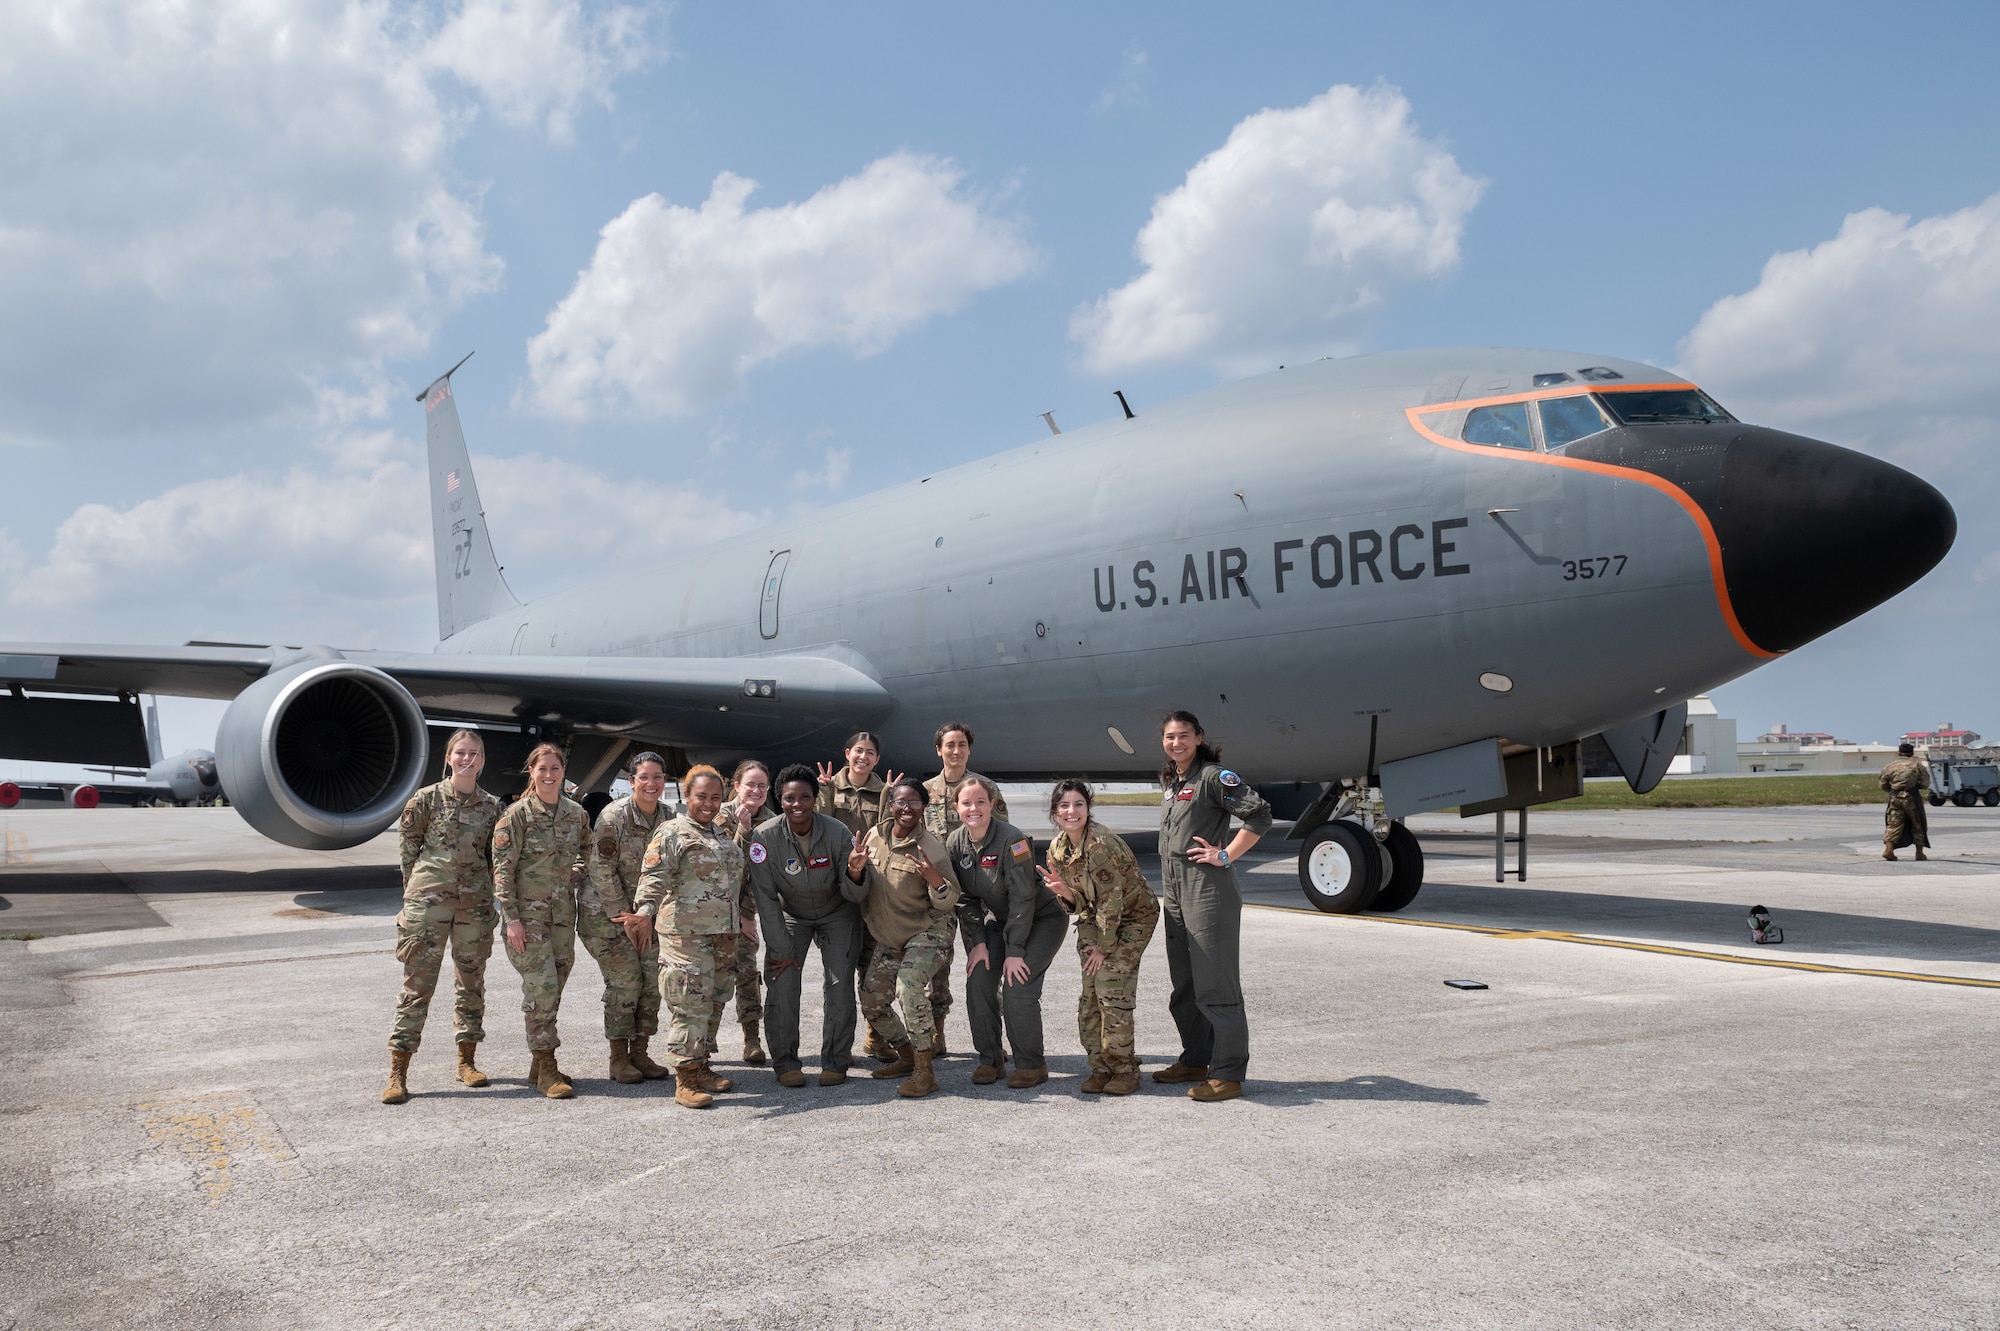 Female airmen pose for a group photo in front of a KC-135 Stratotanker